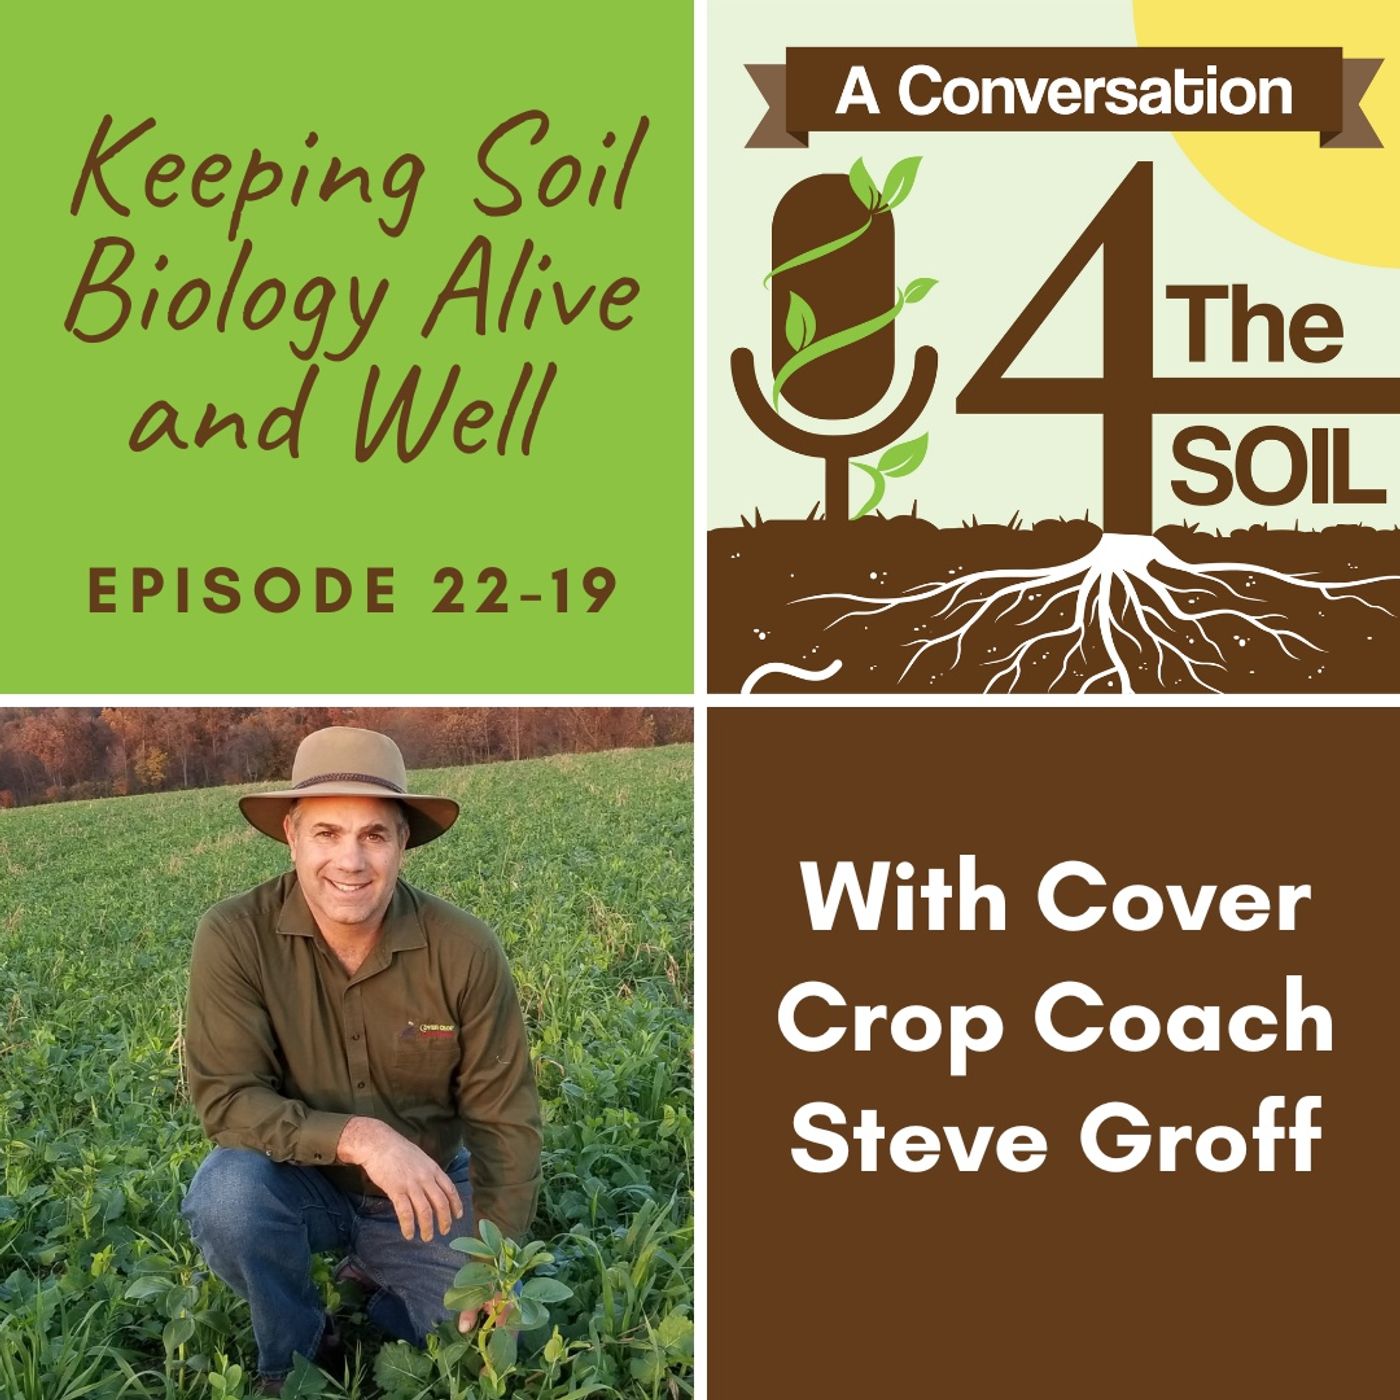 Episode 22 - 19: Keeping Soil Biology Alive and Well with Cover Crop Coach Steve Groff